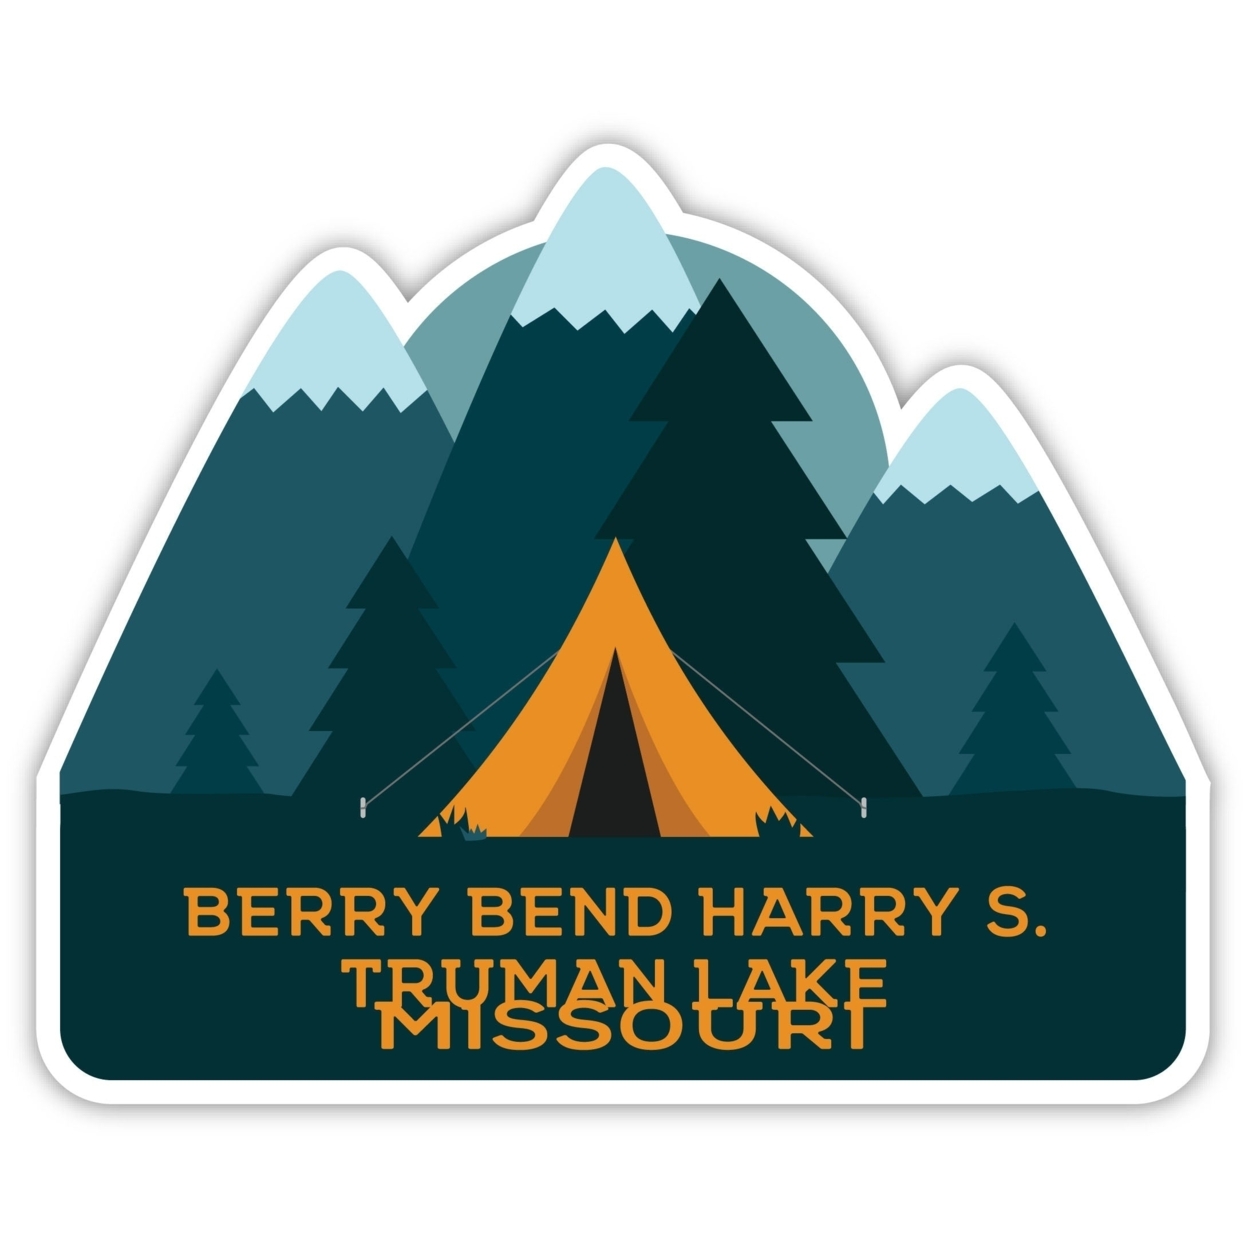 Berry Bend Harry S. Truman Lake Missouri Souvenir Decorative Stickers (Choose Theme And Size) - 4-Pack, 8-Inch, Tent